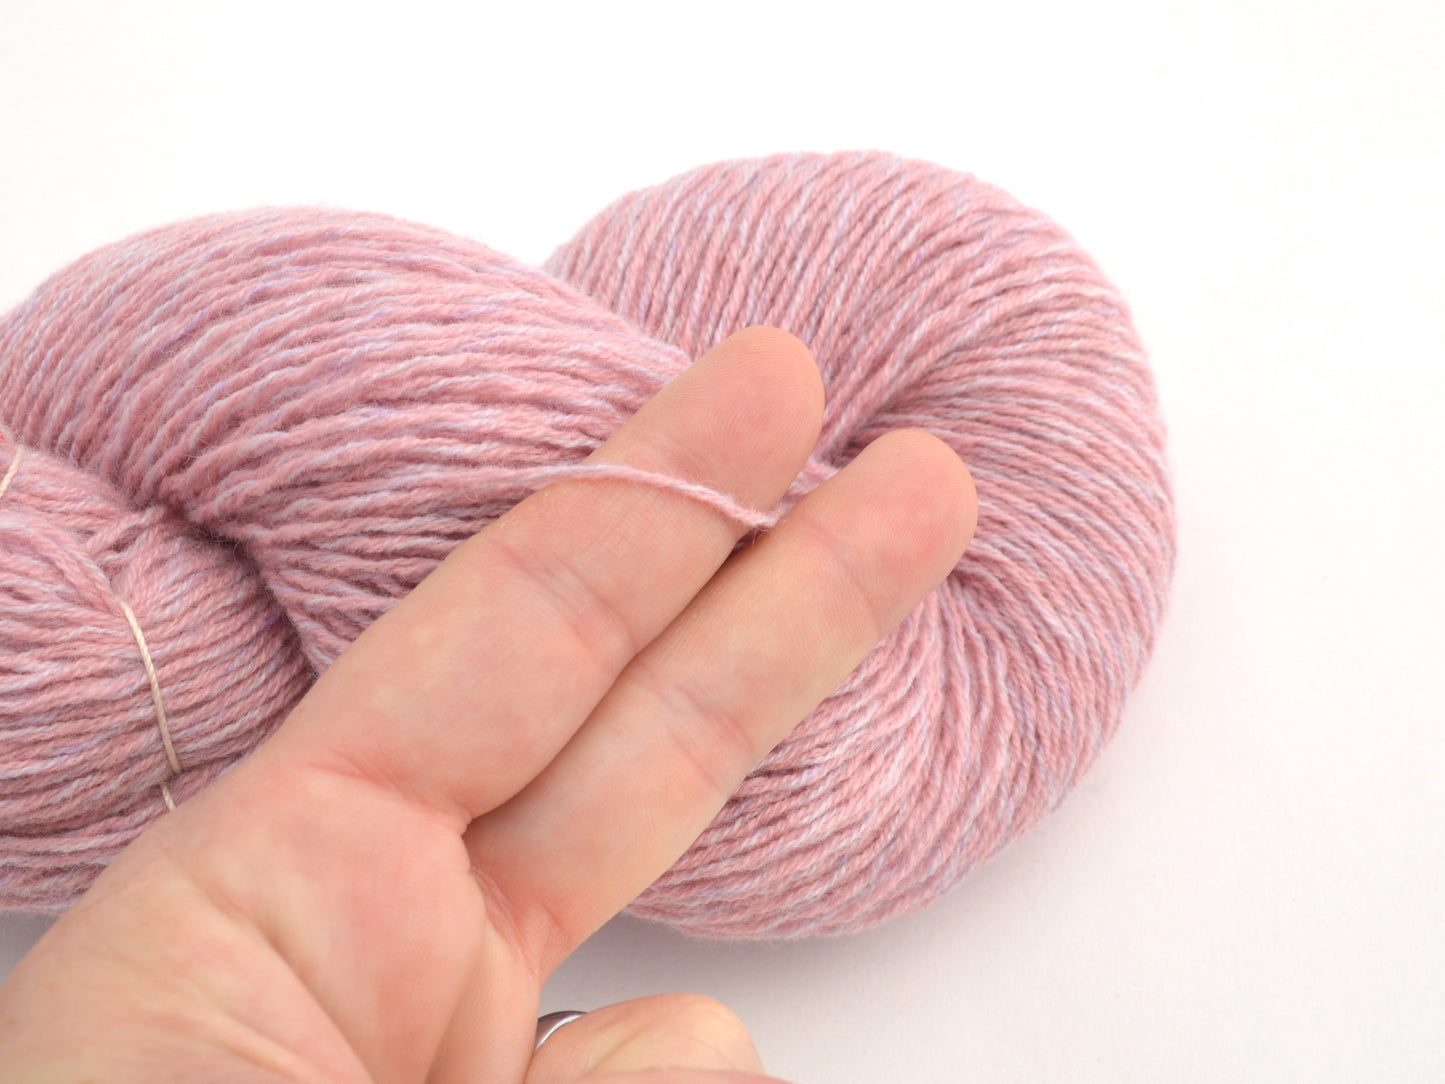 Fingering Weight Recycled Cashmere Yarn in Muted Pink